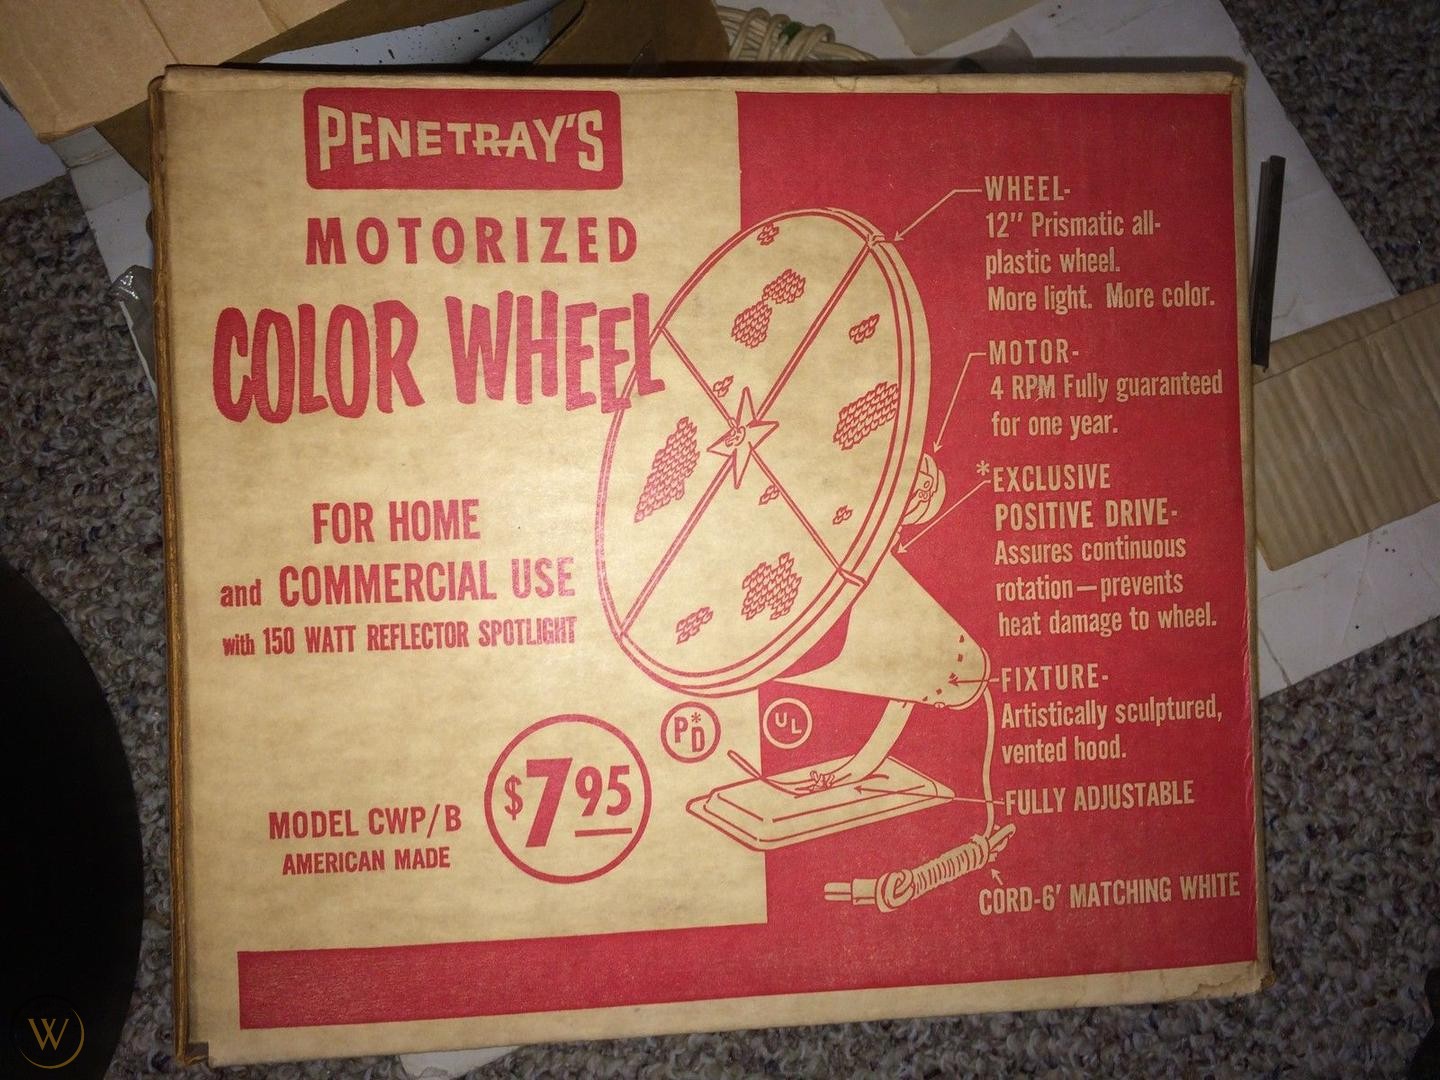 poster - Penetray'S Motorized Color Wheel M Wheel 12" Prismatic all plastic wheel. More light. More color. Motor 4 Rpm Fully guaranteed for one year. Exclusive Positive Drive Assures continuous rotation prevents heat damage to wheel. Fixture Artistically…